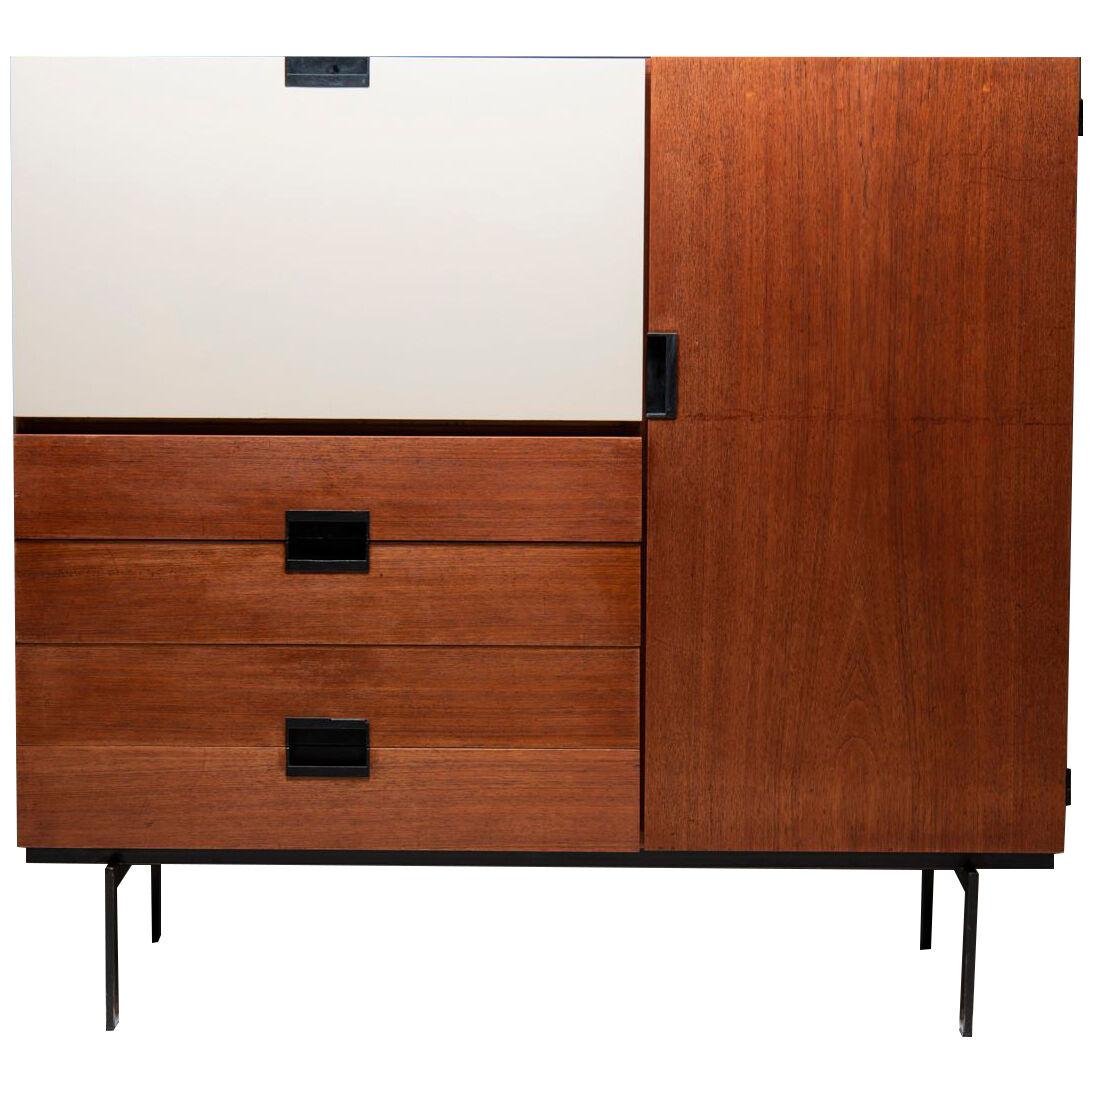 'CU01' Cabinet by Cees Braakman for Pastoe